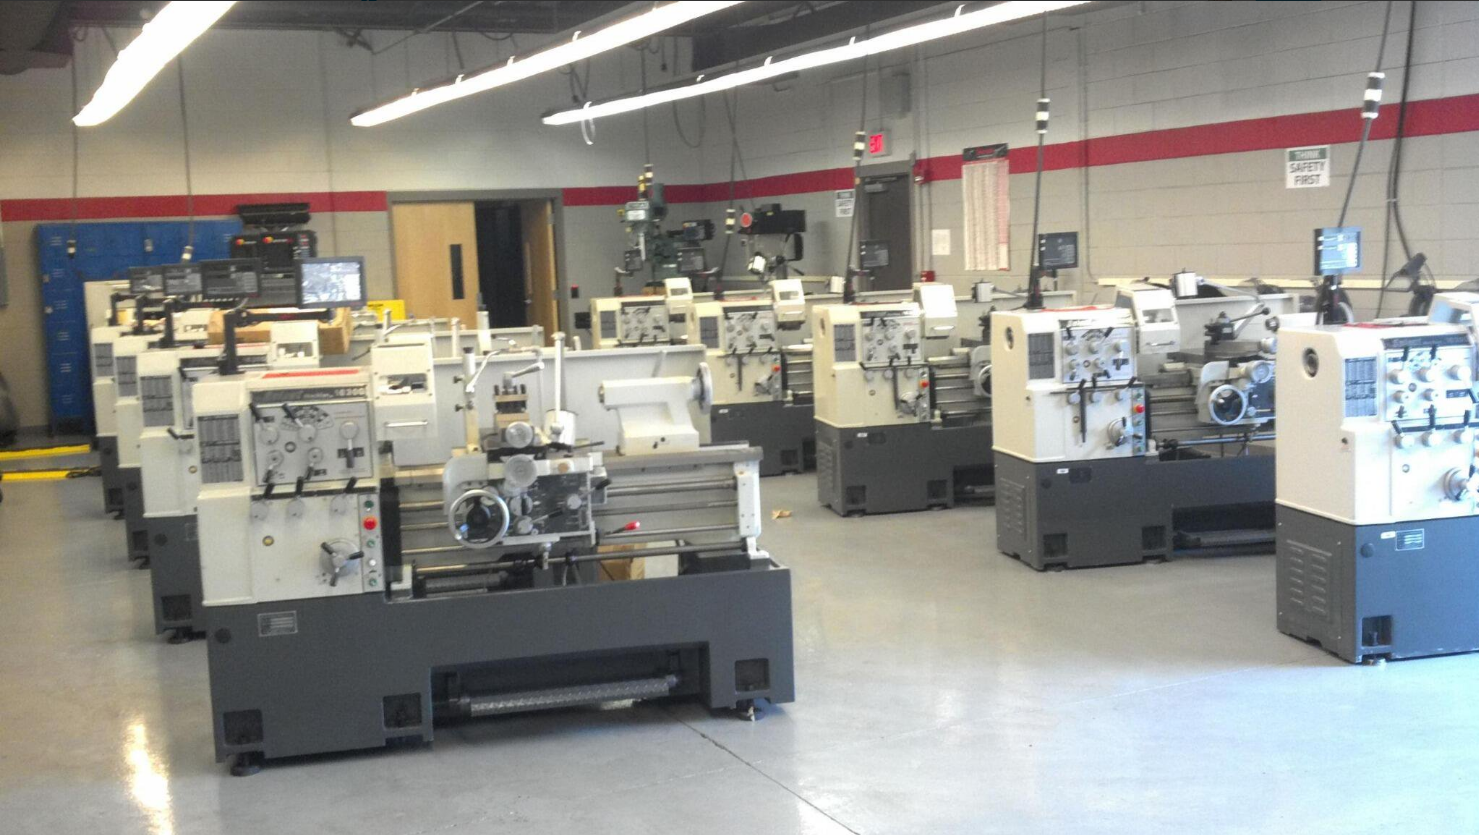 Select Machine Tool Group is an importer of high quality CNC and manual machines manufactured in Taiwan. Our years of experience and expertise offer the finest machine tools in the industry. Our mission is to provide top quality machine tools and service through our network of highly qualified machine tool distributors.